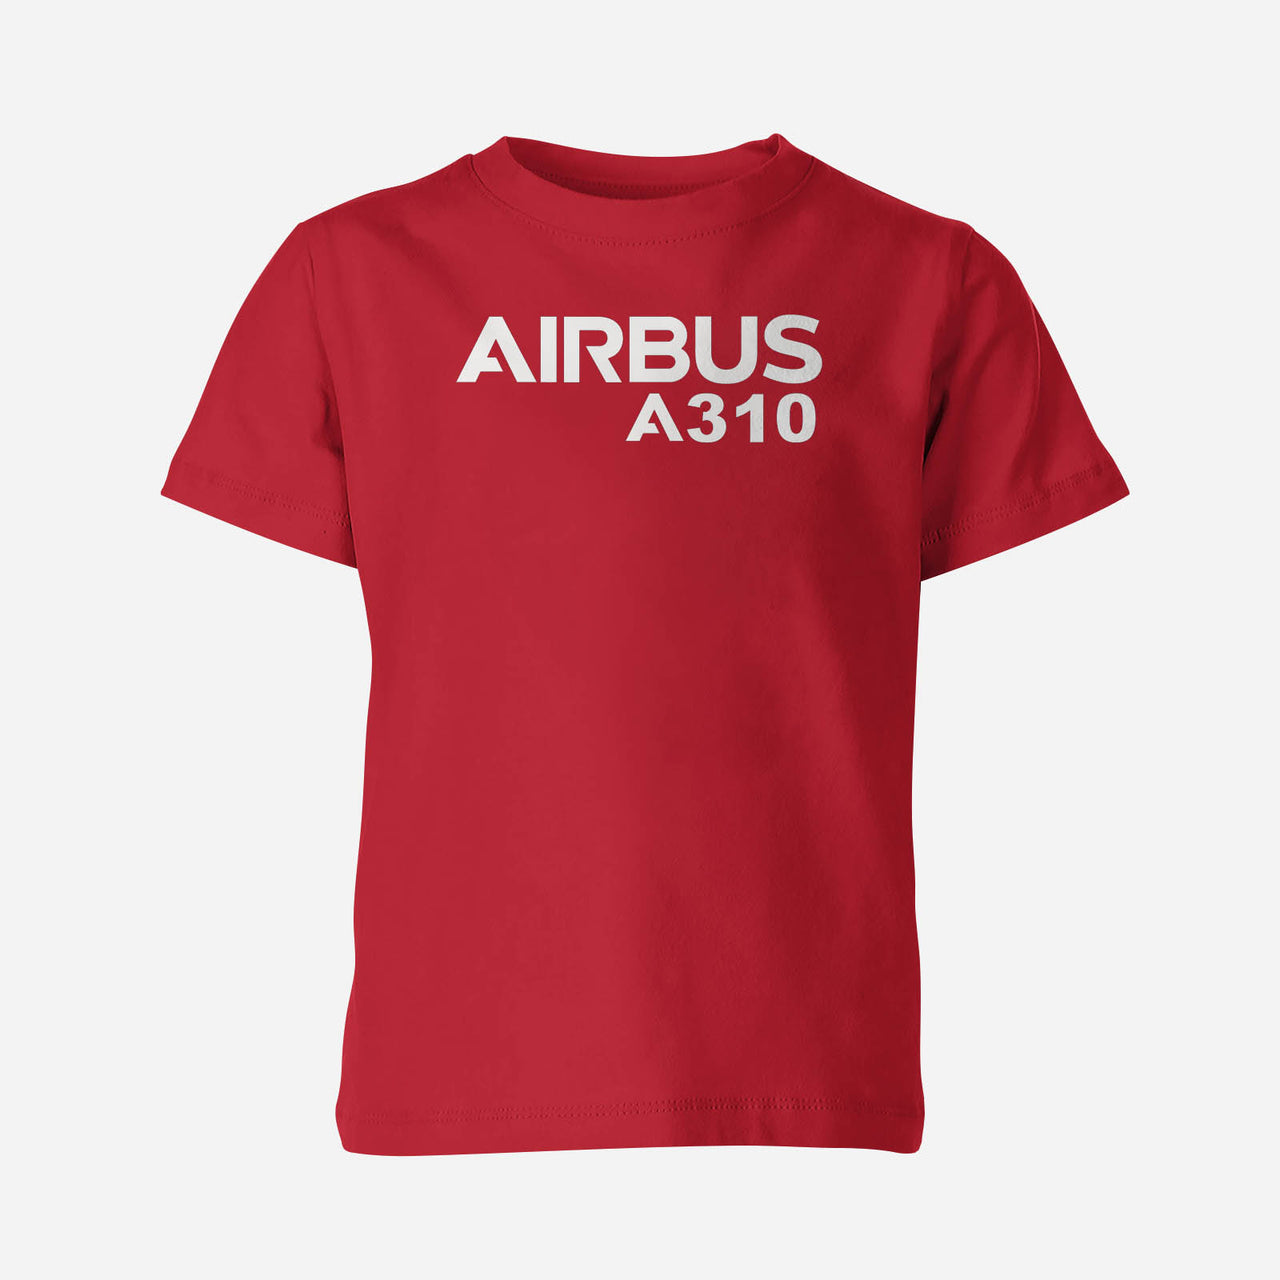 Airbus A310 & Text Designed Children T-Shirts